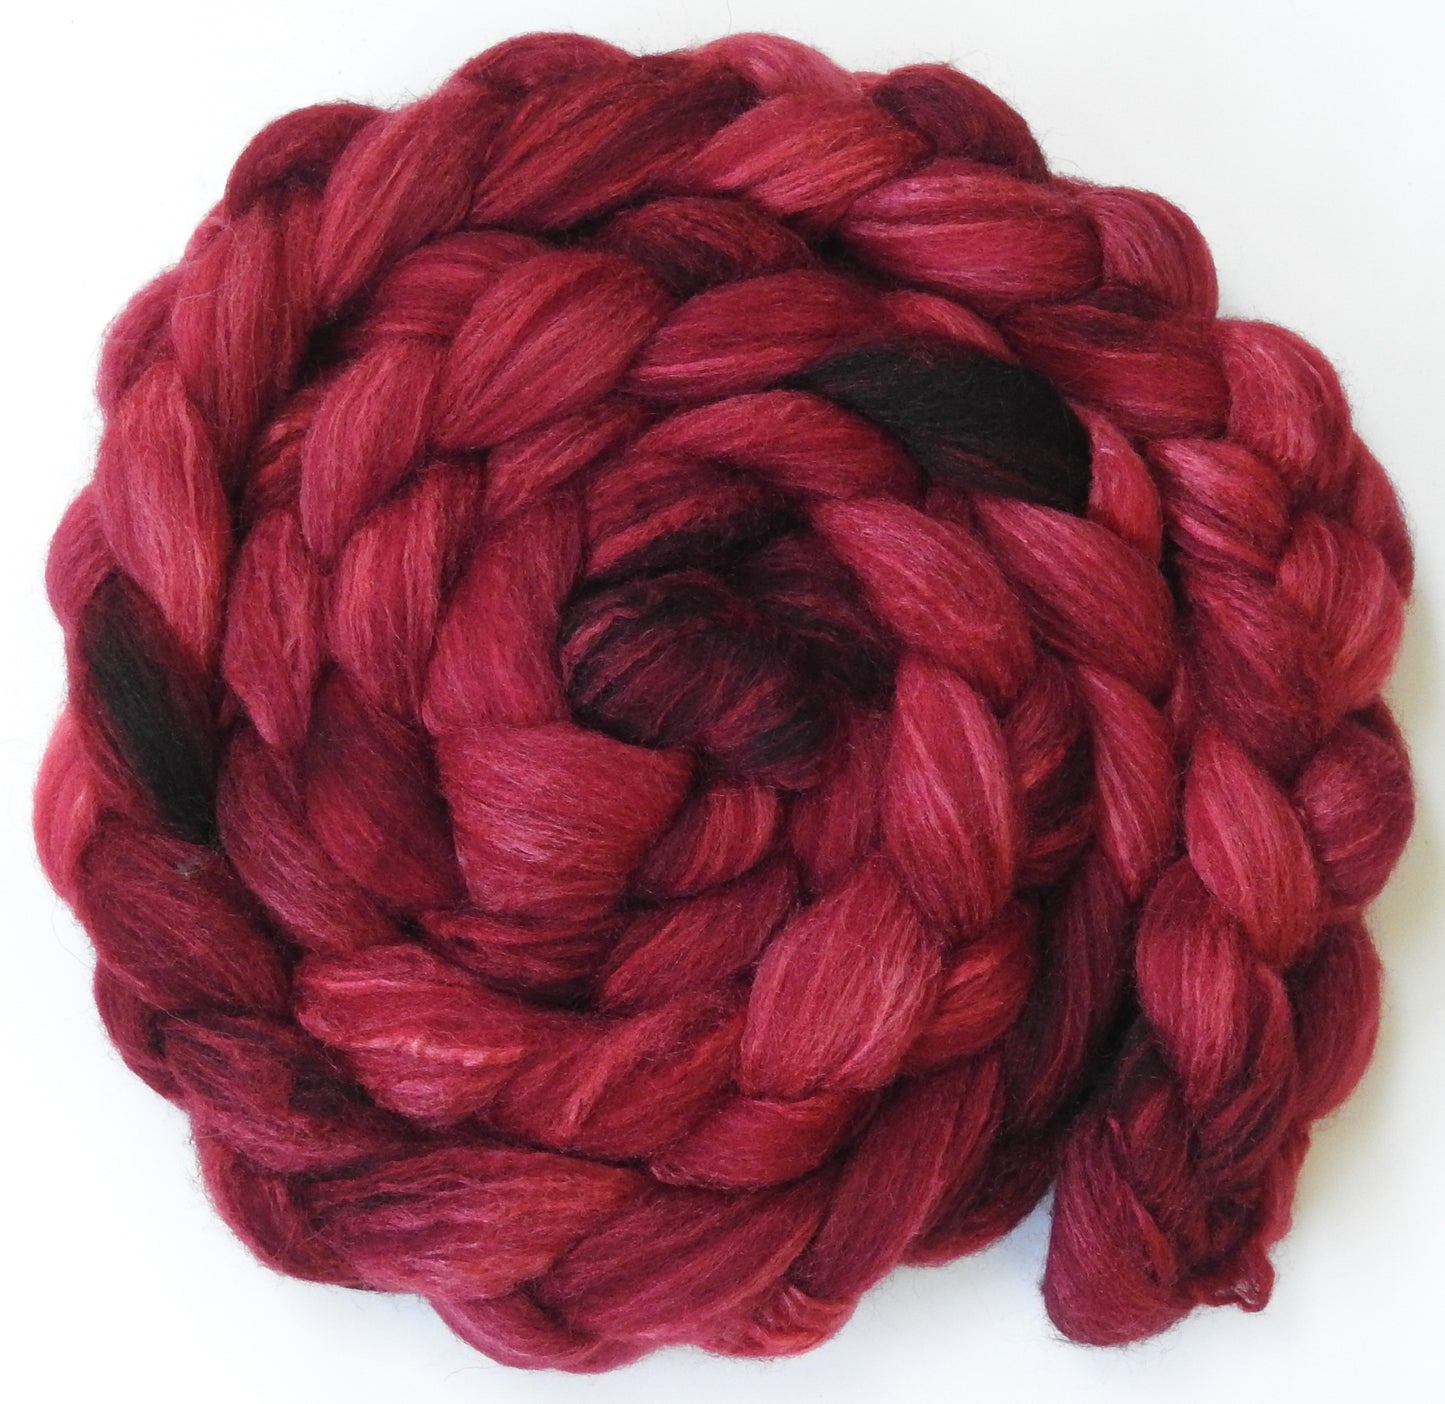 Holly Berry - 6 oz.- British Southdown/ tussah silk (65/ 35)